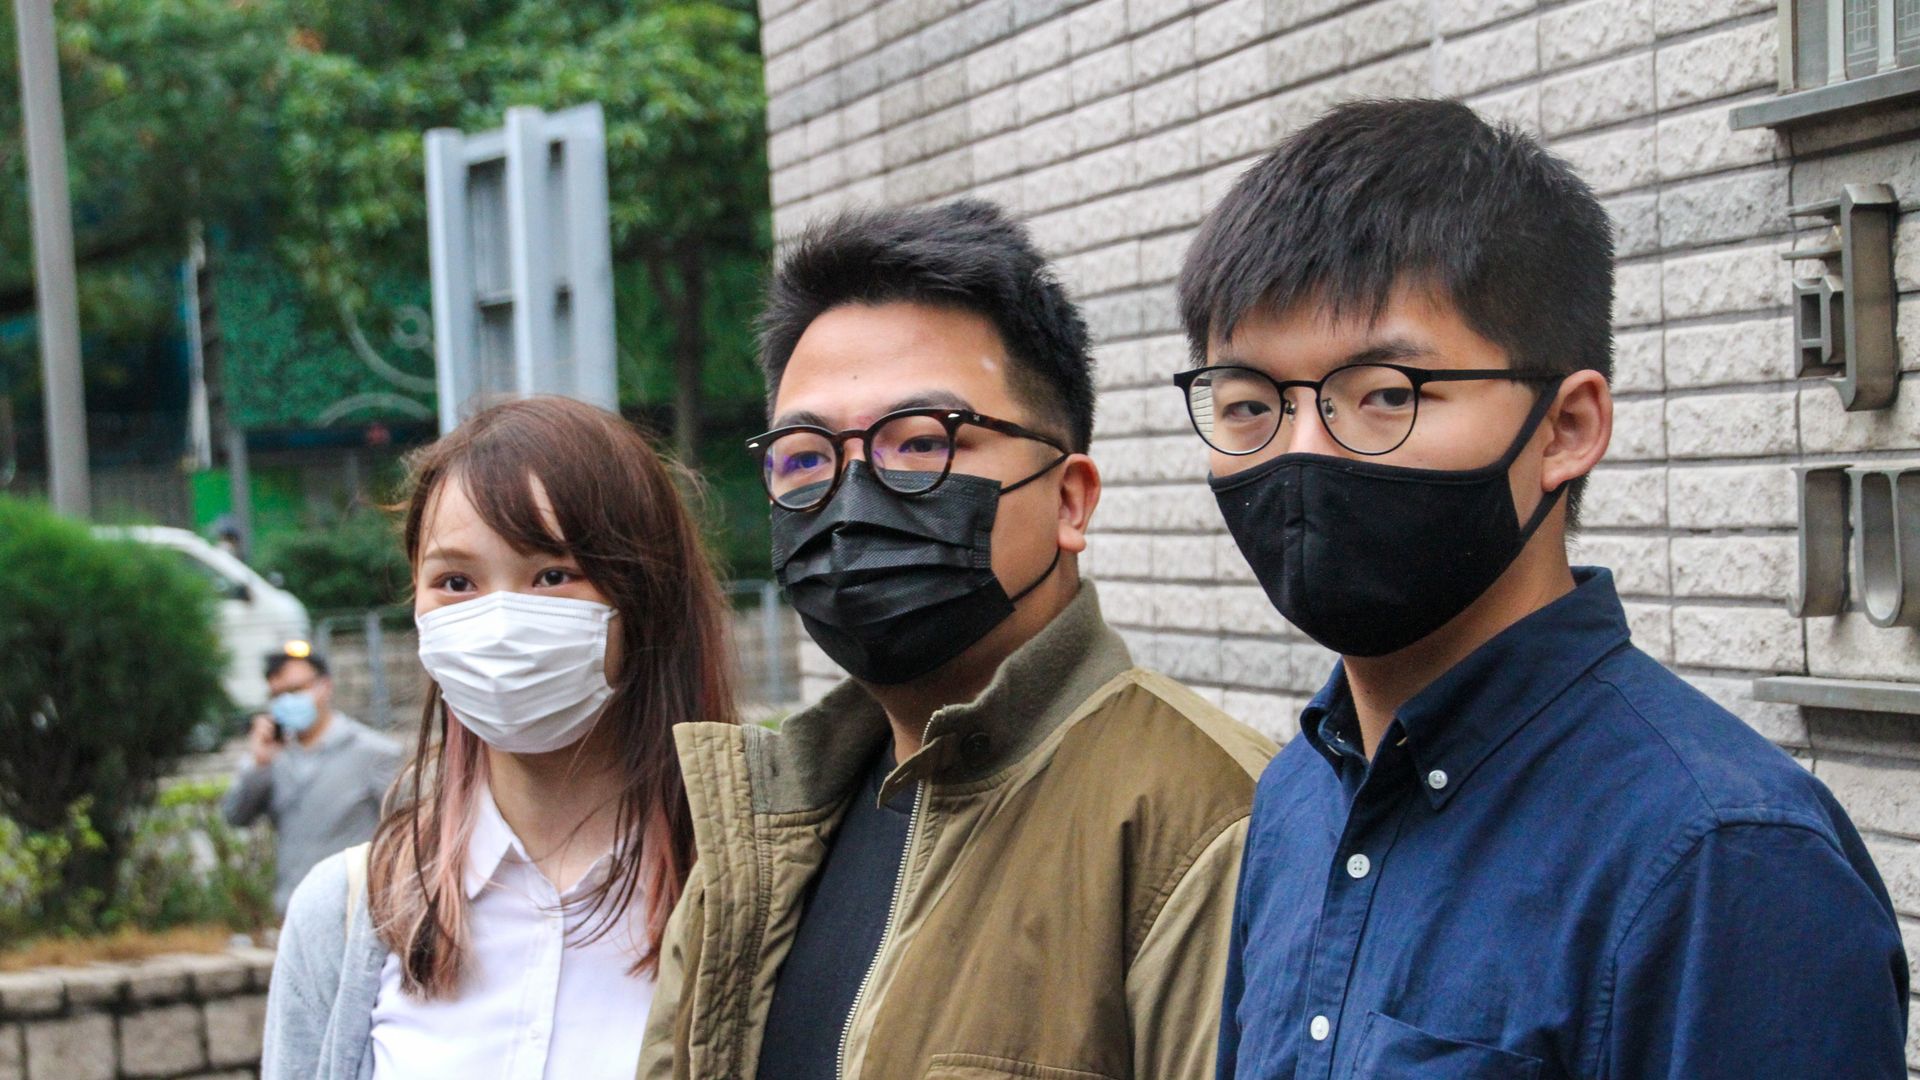 Hong Kong activists Agnes Chow (left), Ivan Lam (centre) and Joshua Wong (right) attend court facing charges of illegal assembly from the citys protests in 2019